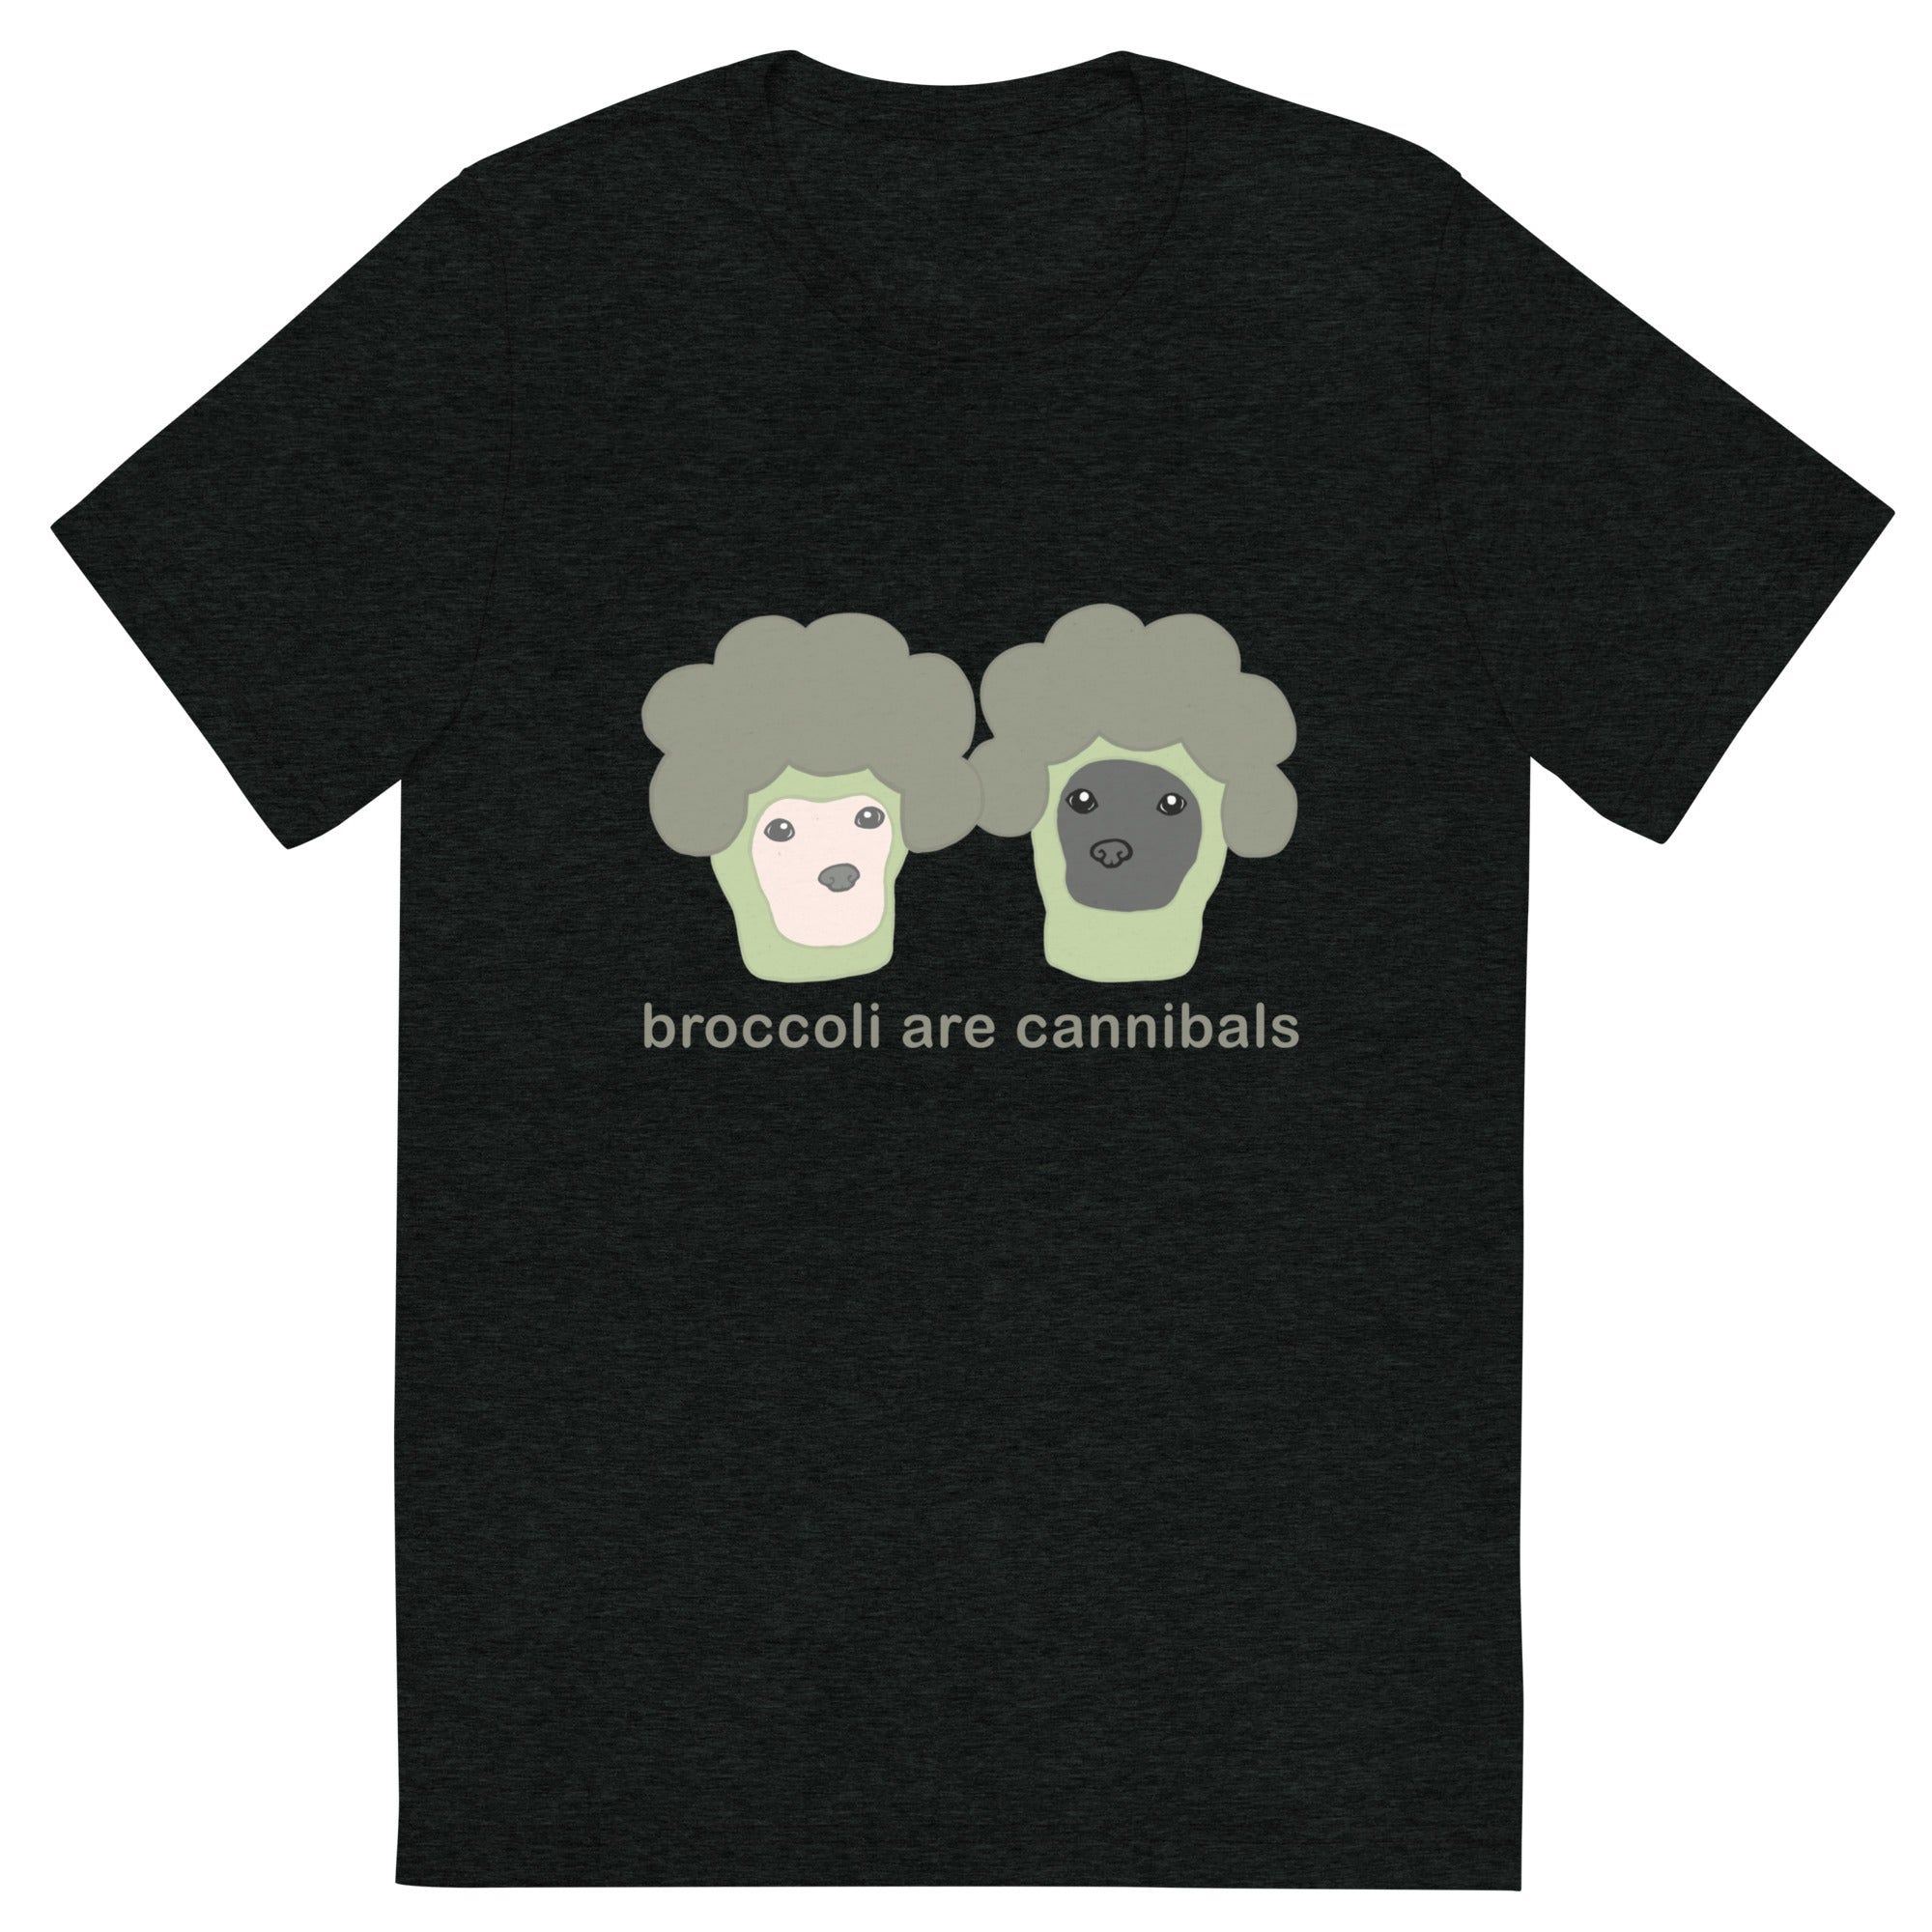 "Broccoli Are Cannibals" Adult Unisex Short sleeve t-shirt